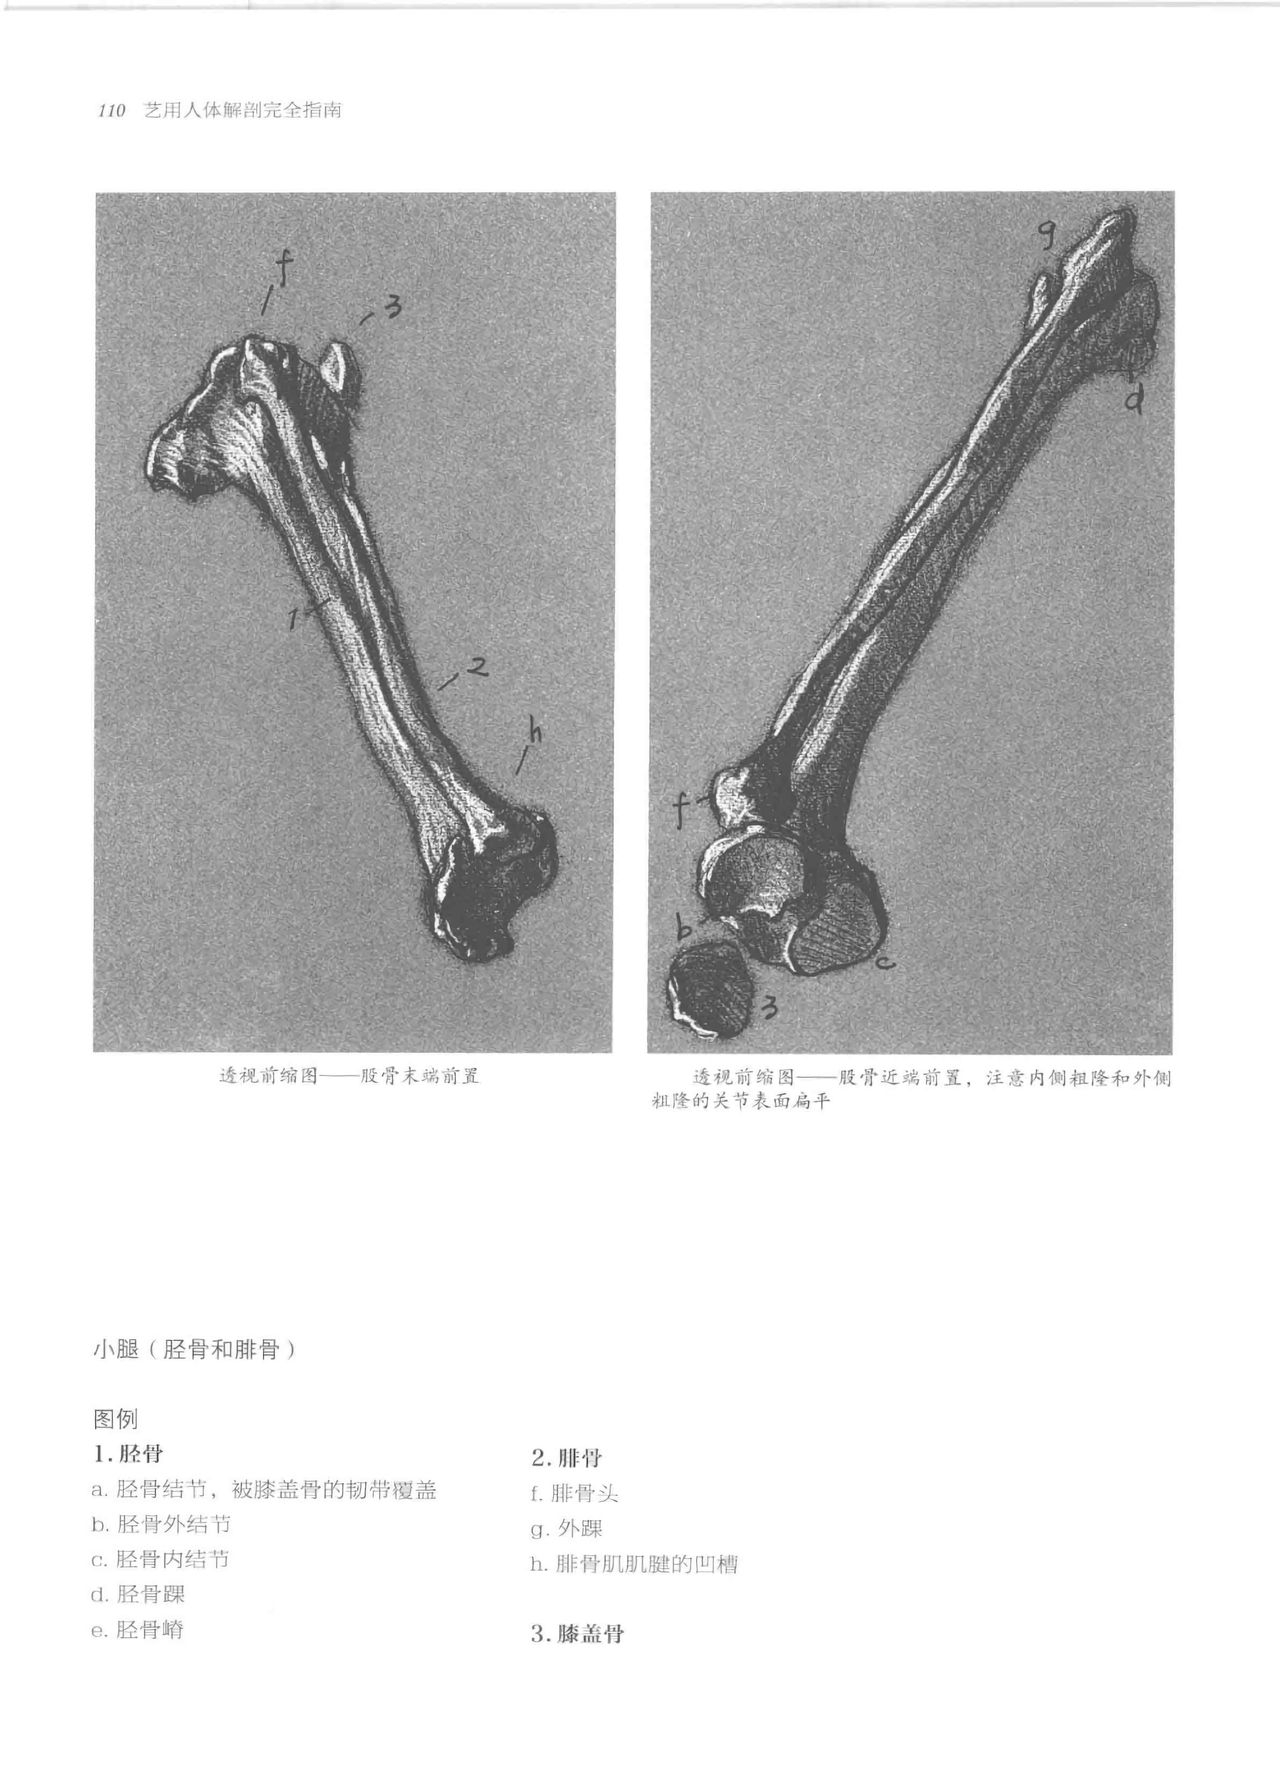 Anatomy-A Complete Guide for Artists - Joseph Sheppard [Chinese] 110